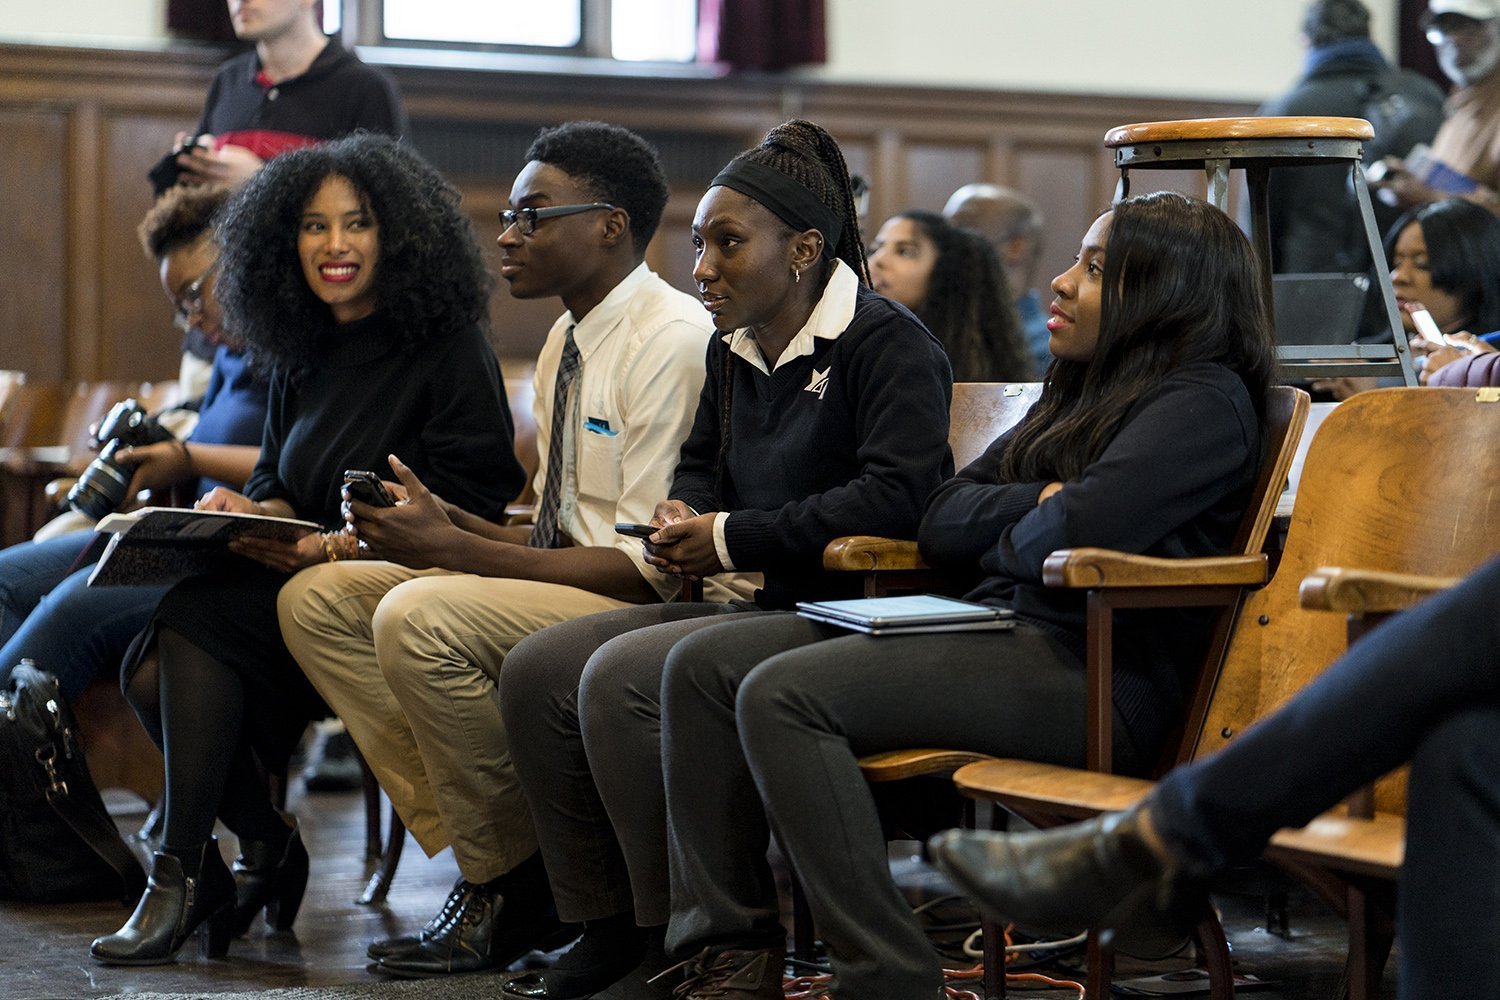 From Right - Ashley Joyner, Makayla Guisse, Remy Papillon from the Student Government of Cristo Rey Brooklyn HS, and Kelly Mena of KCP, who moderated the forum. (Photo by Tsubasa Berg)